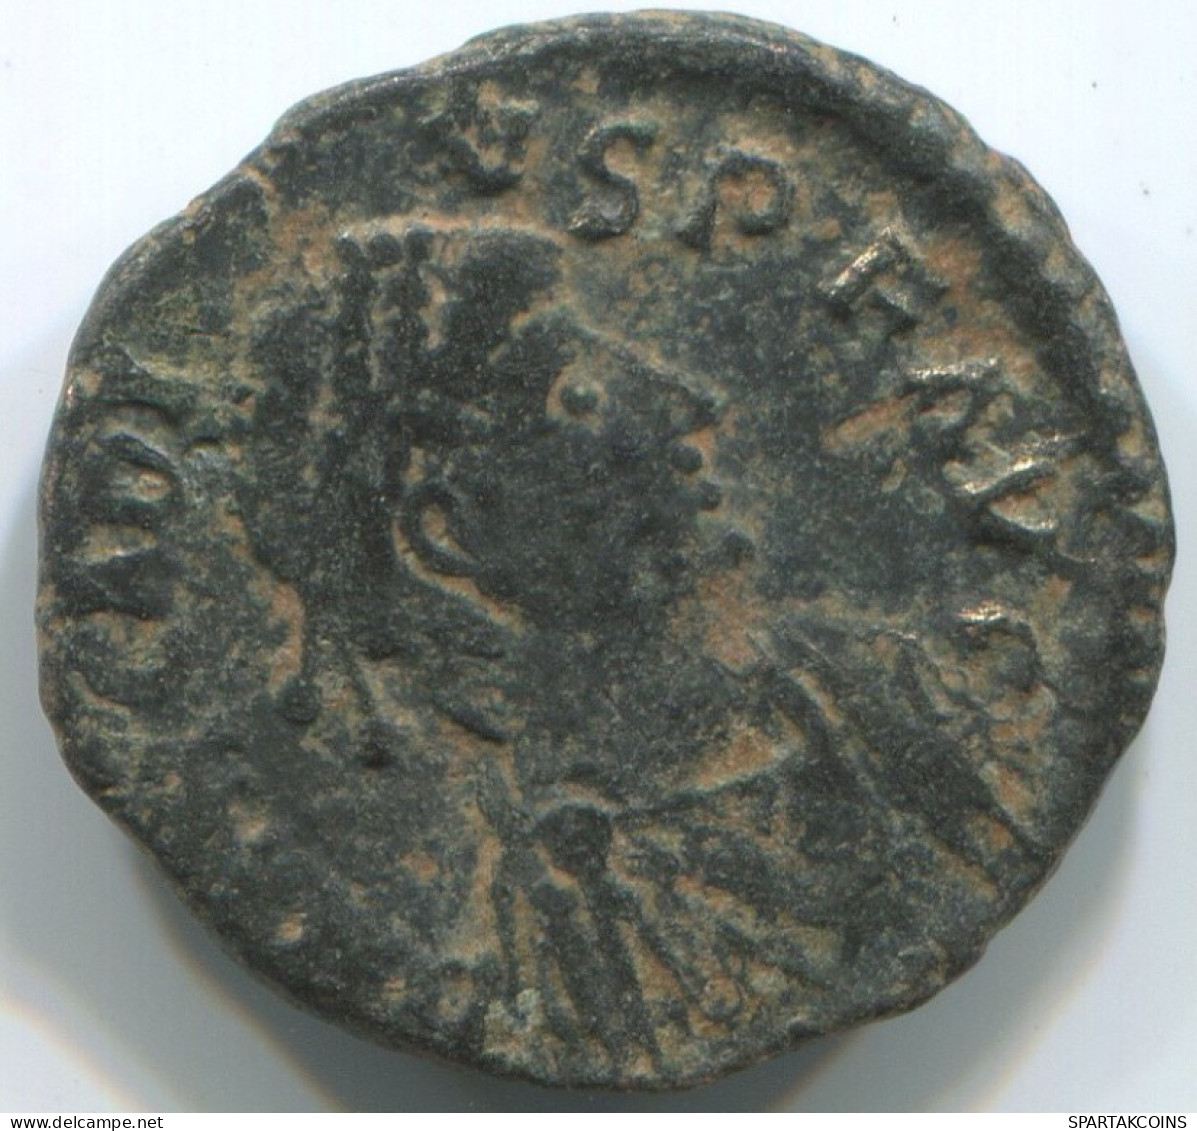 LATE ROMAN EMPIRE Pièce Antique Authentique Roman Pièce 2.1g/16mm #ANT2416.14.F.A - The End Of Empire (363 AD To 476 AD)